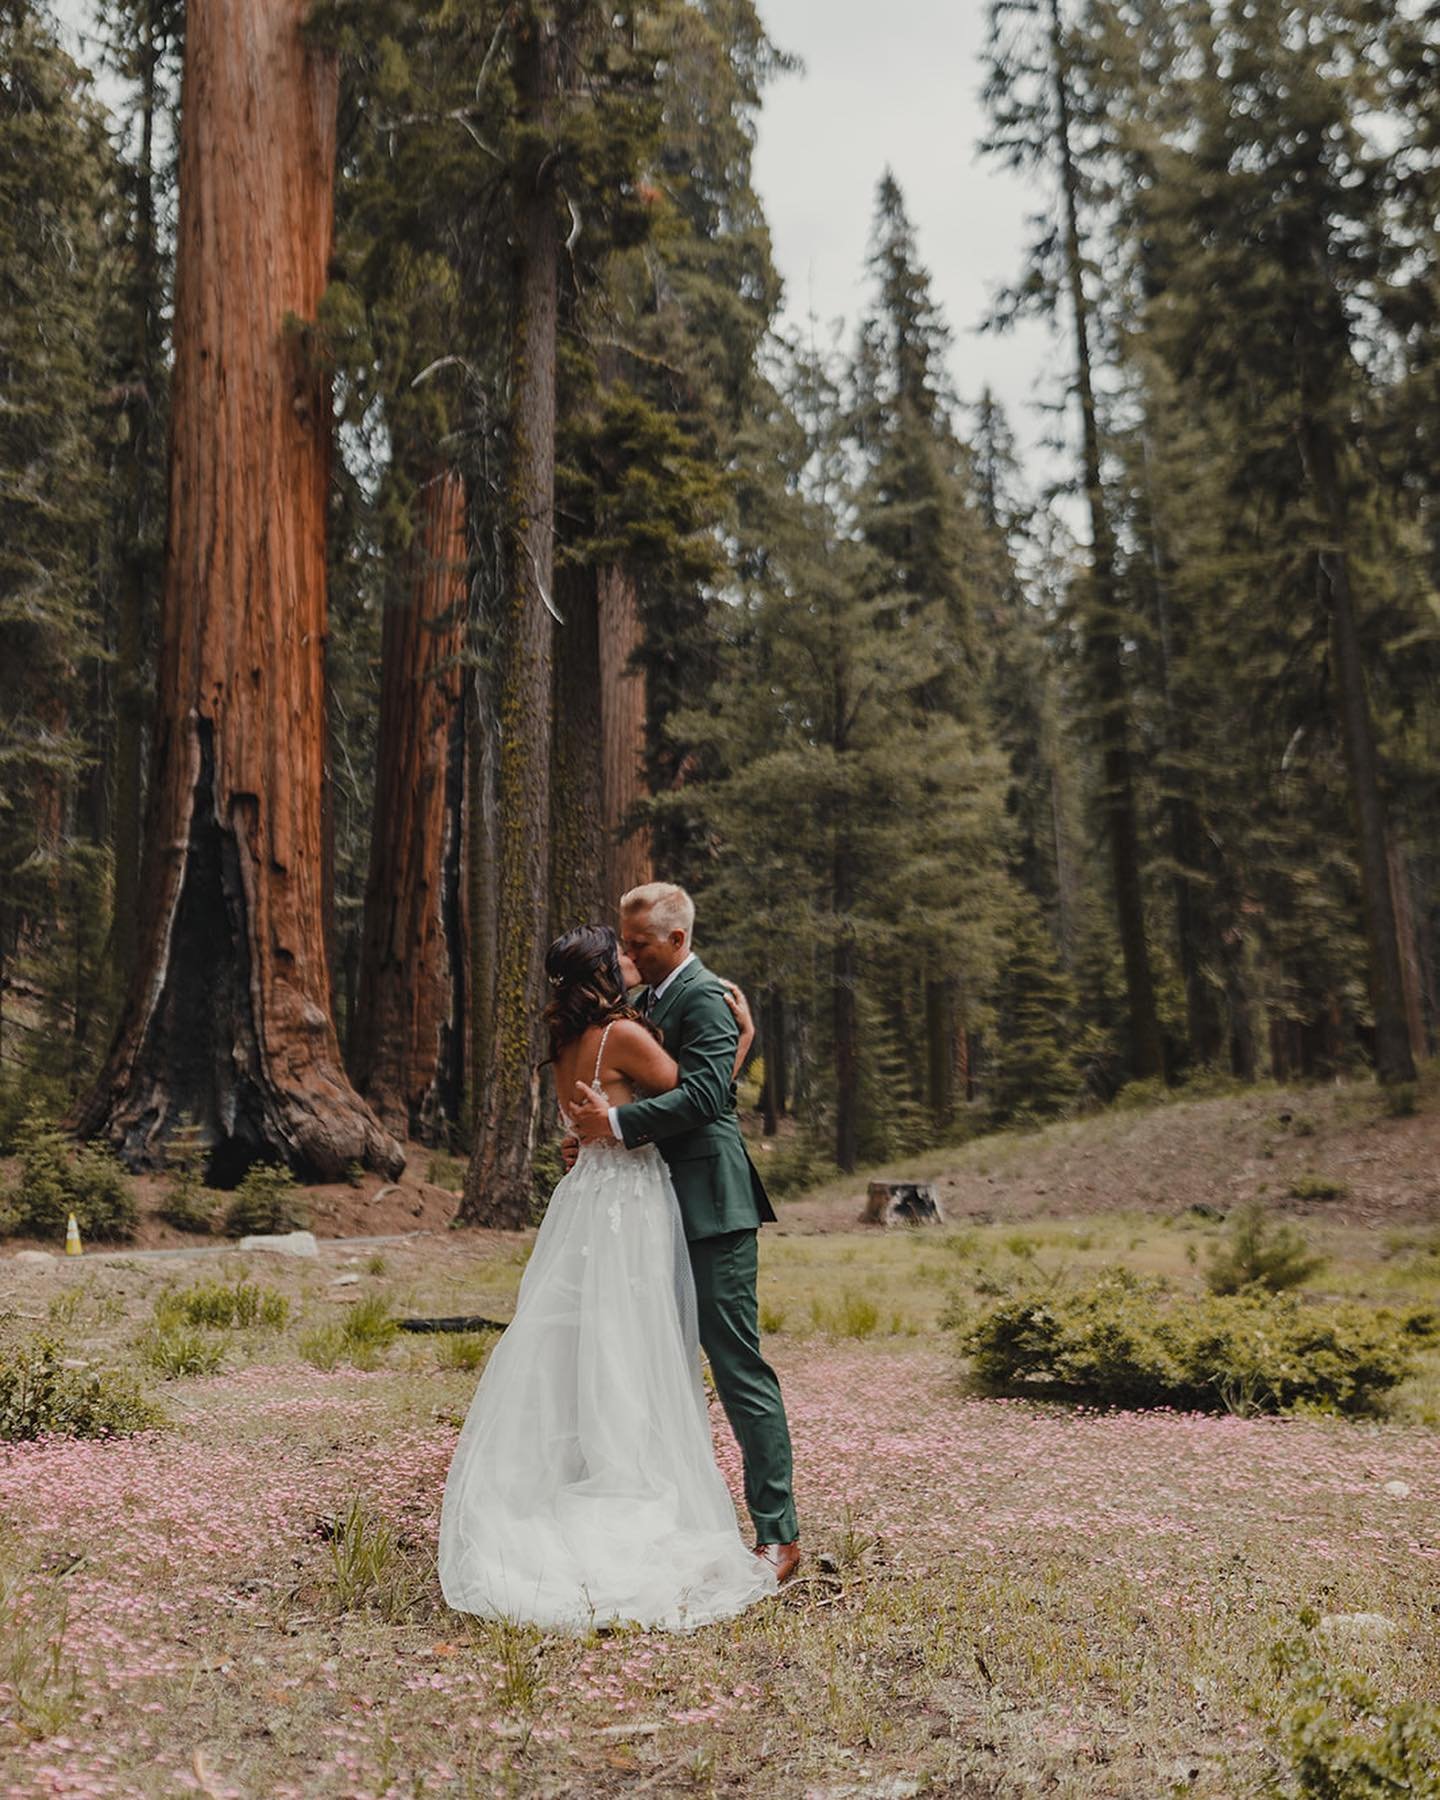 We&rsquo;re so excited about another year of epic love stories - especially our custom All-Inclusive Sequoia Weddings! 🌲
Our collections range from simple 2-person elopements, to up-to-100 people, and include just about everything needed for your da